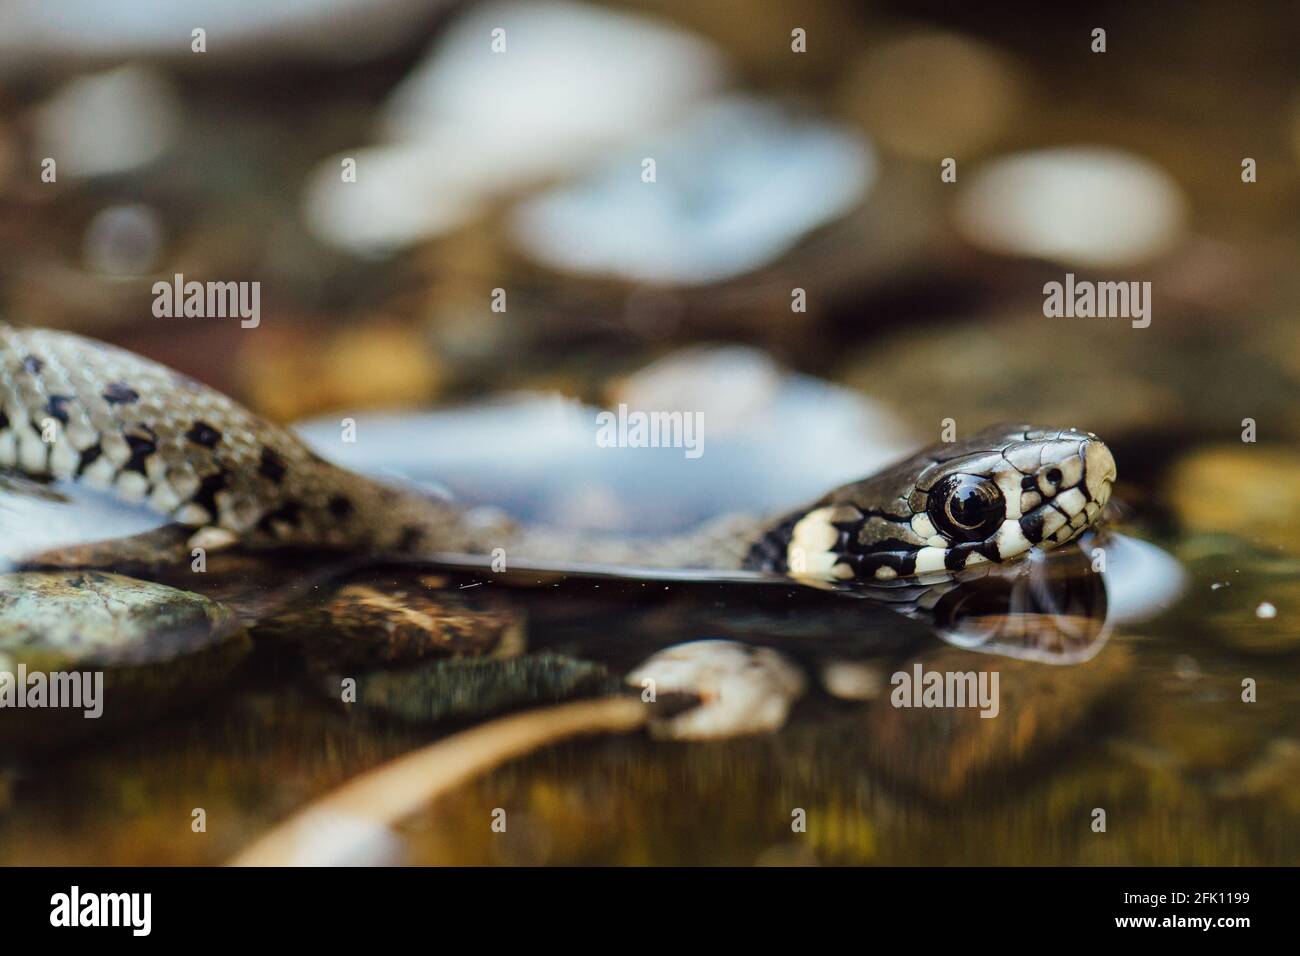 Young Grass snake (Natrix natrix) moves through the water, focus on foreground Stock Photo